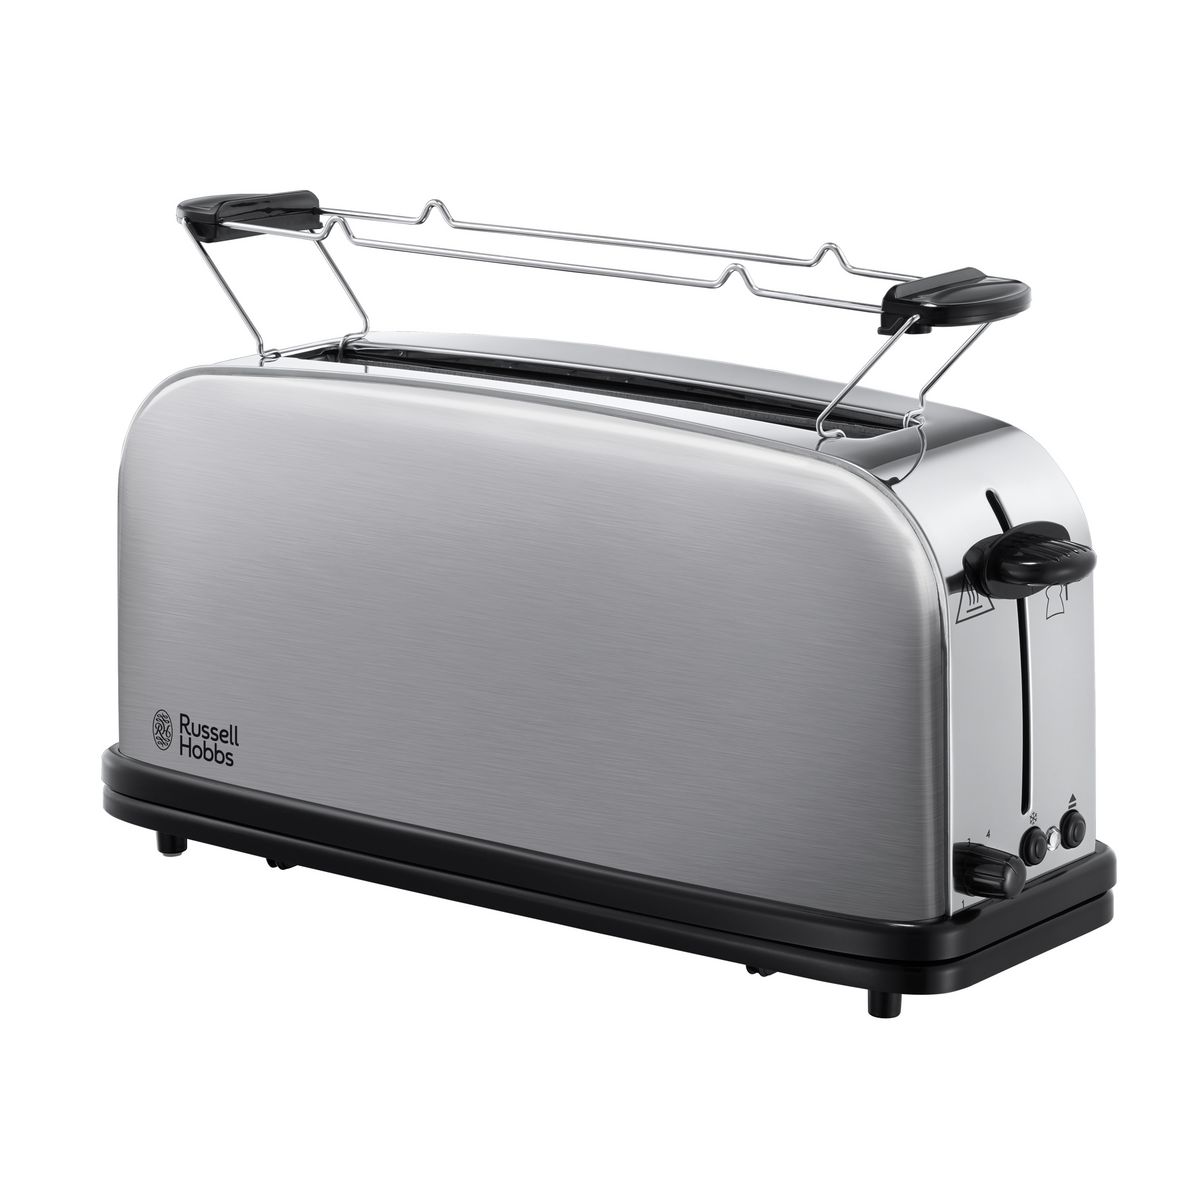 RUSSELL HOBBS Grille pain 21396-56 - Gris